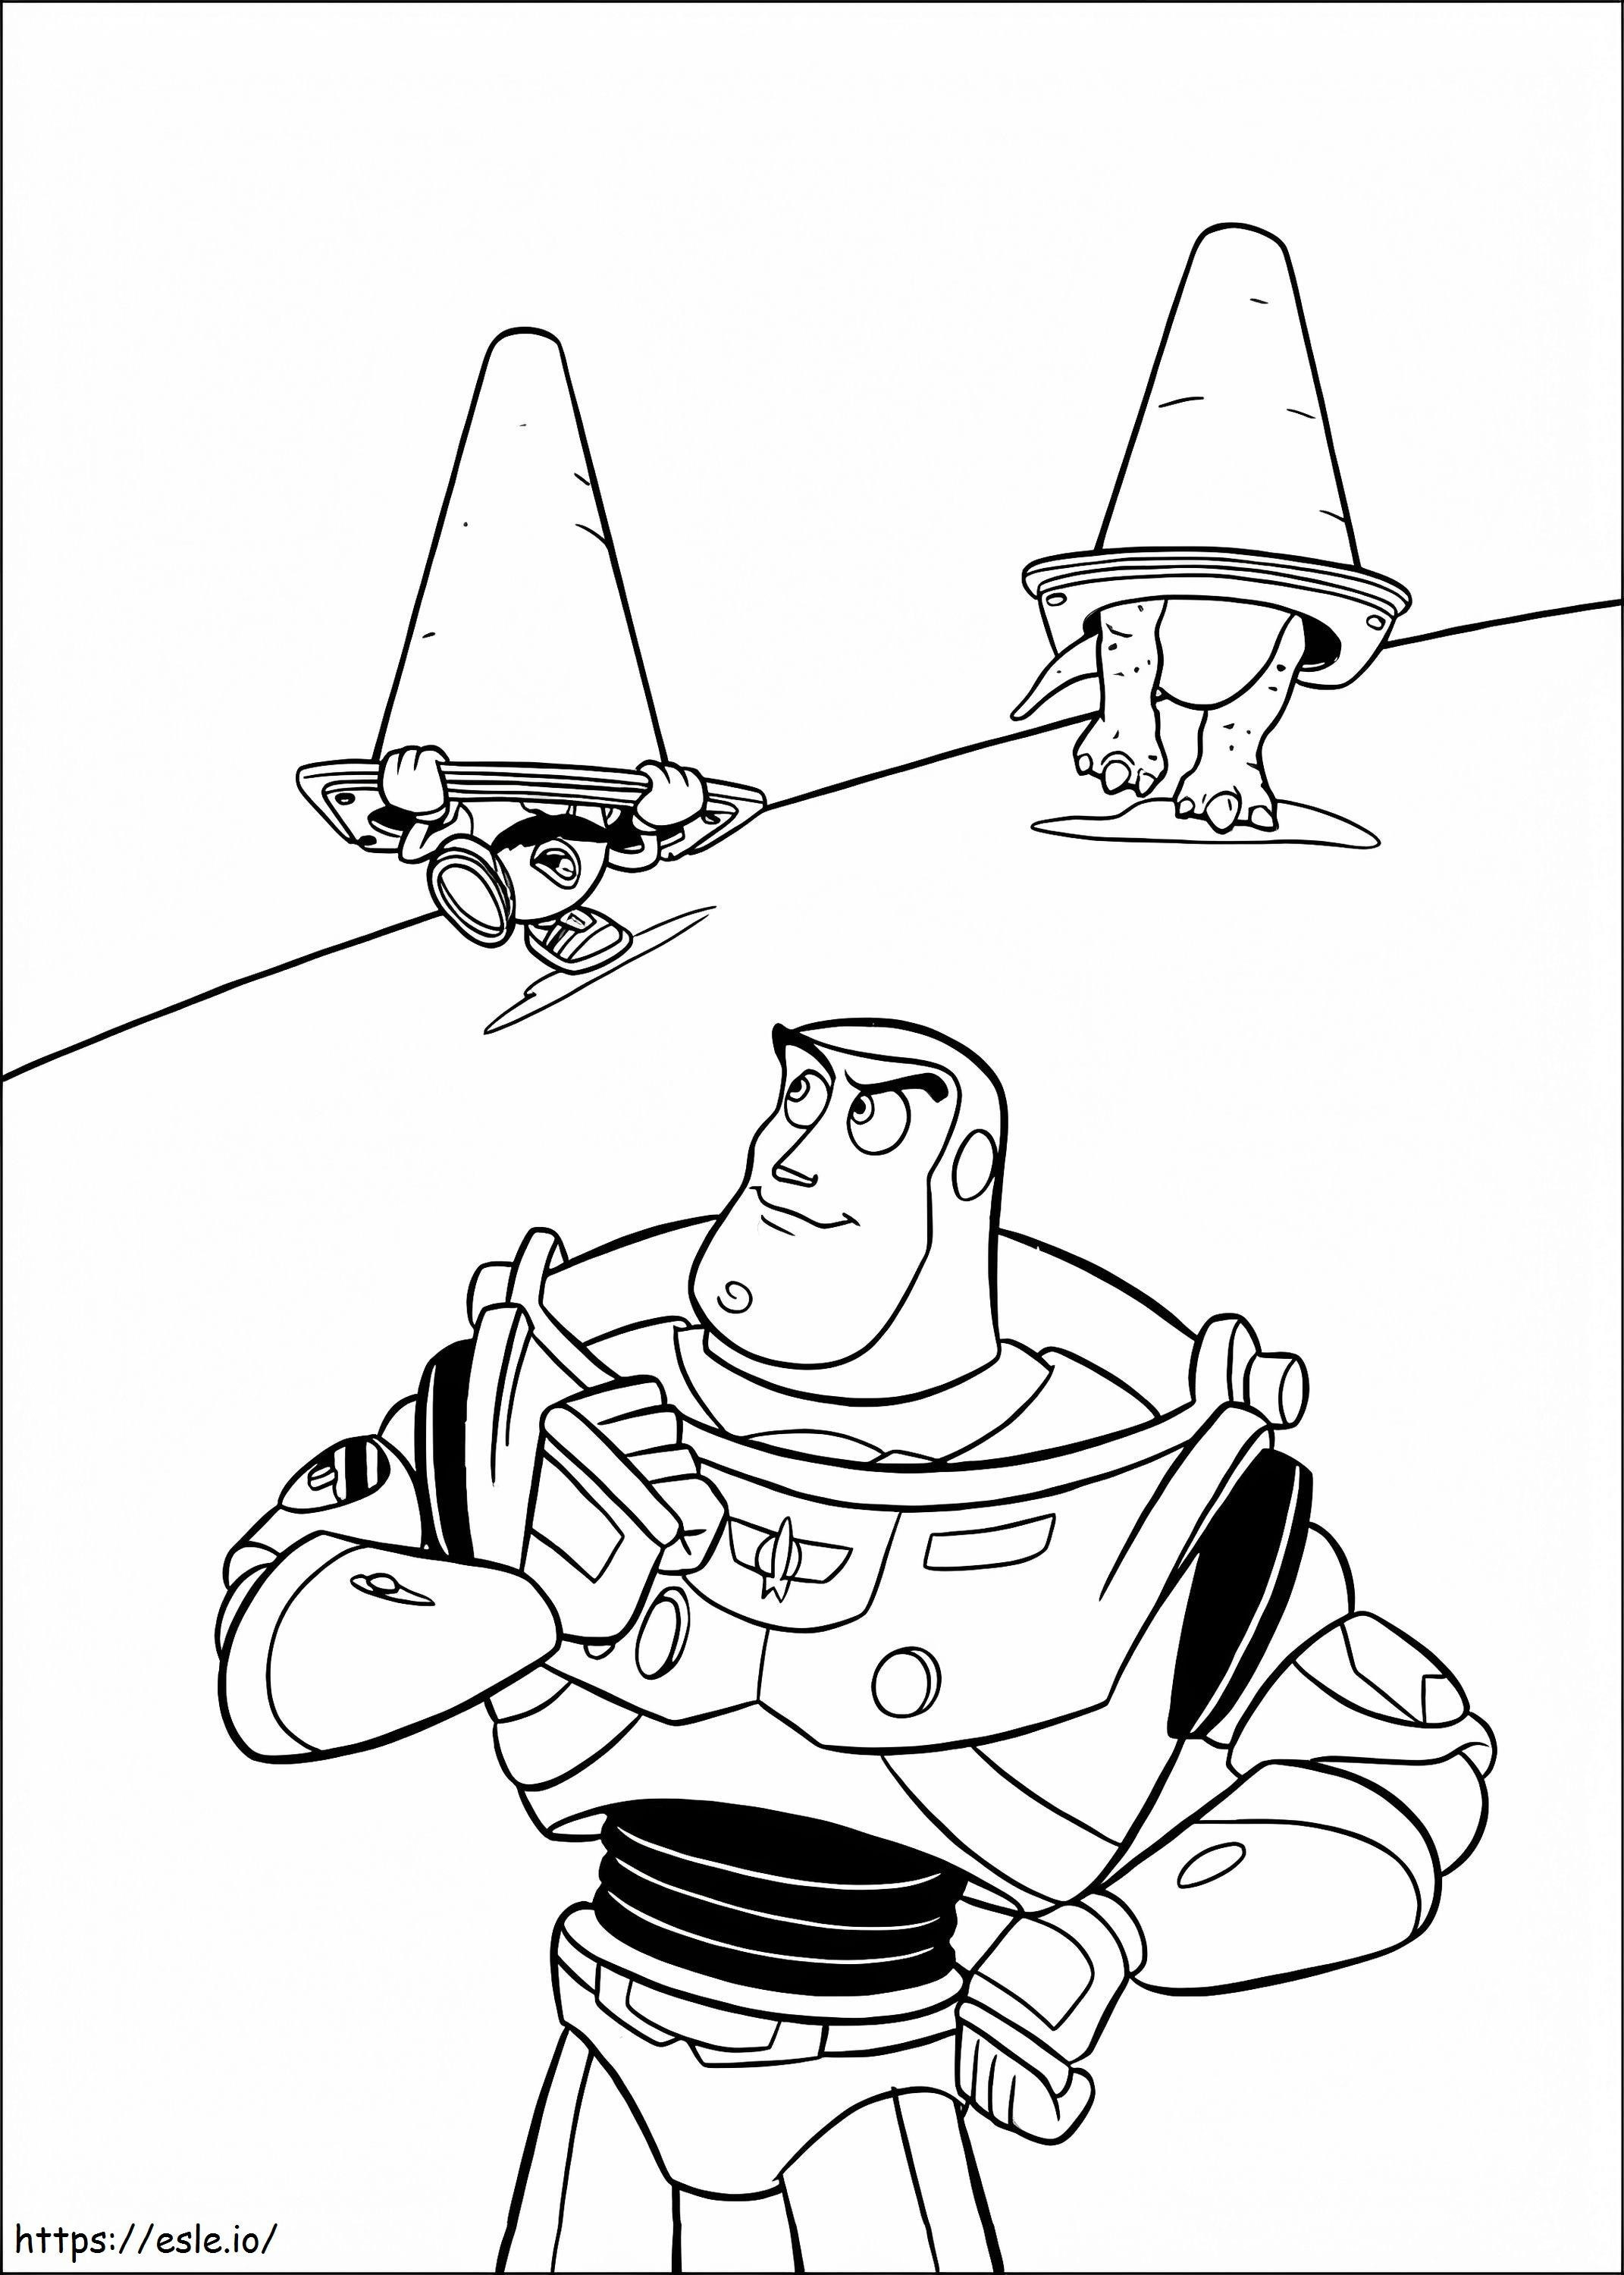 Buzz Lightyear Perfecto coloring page